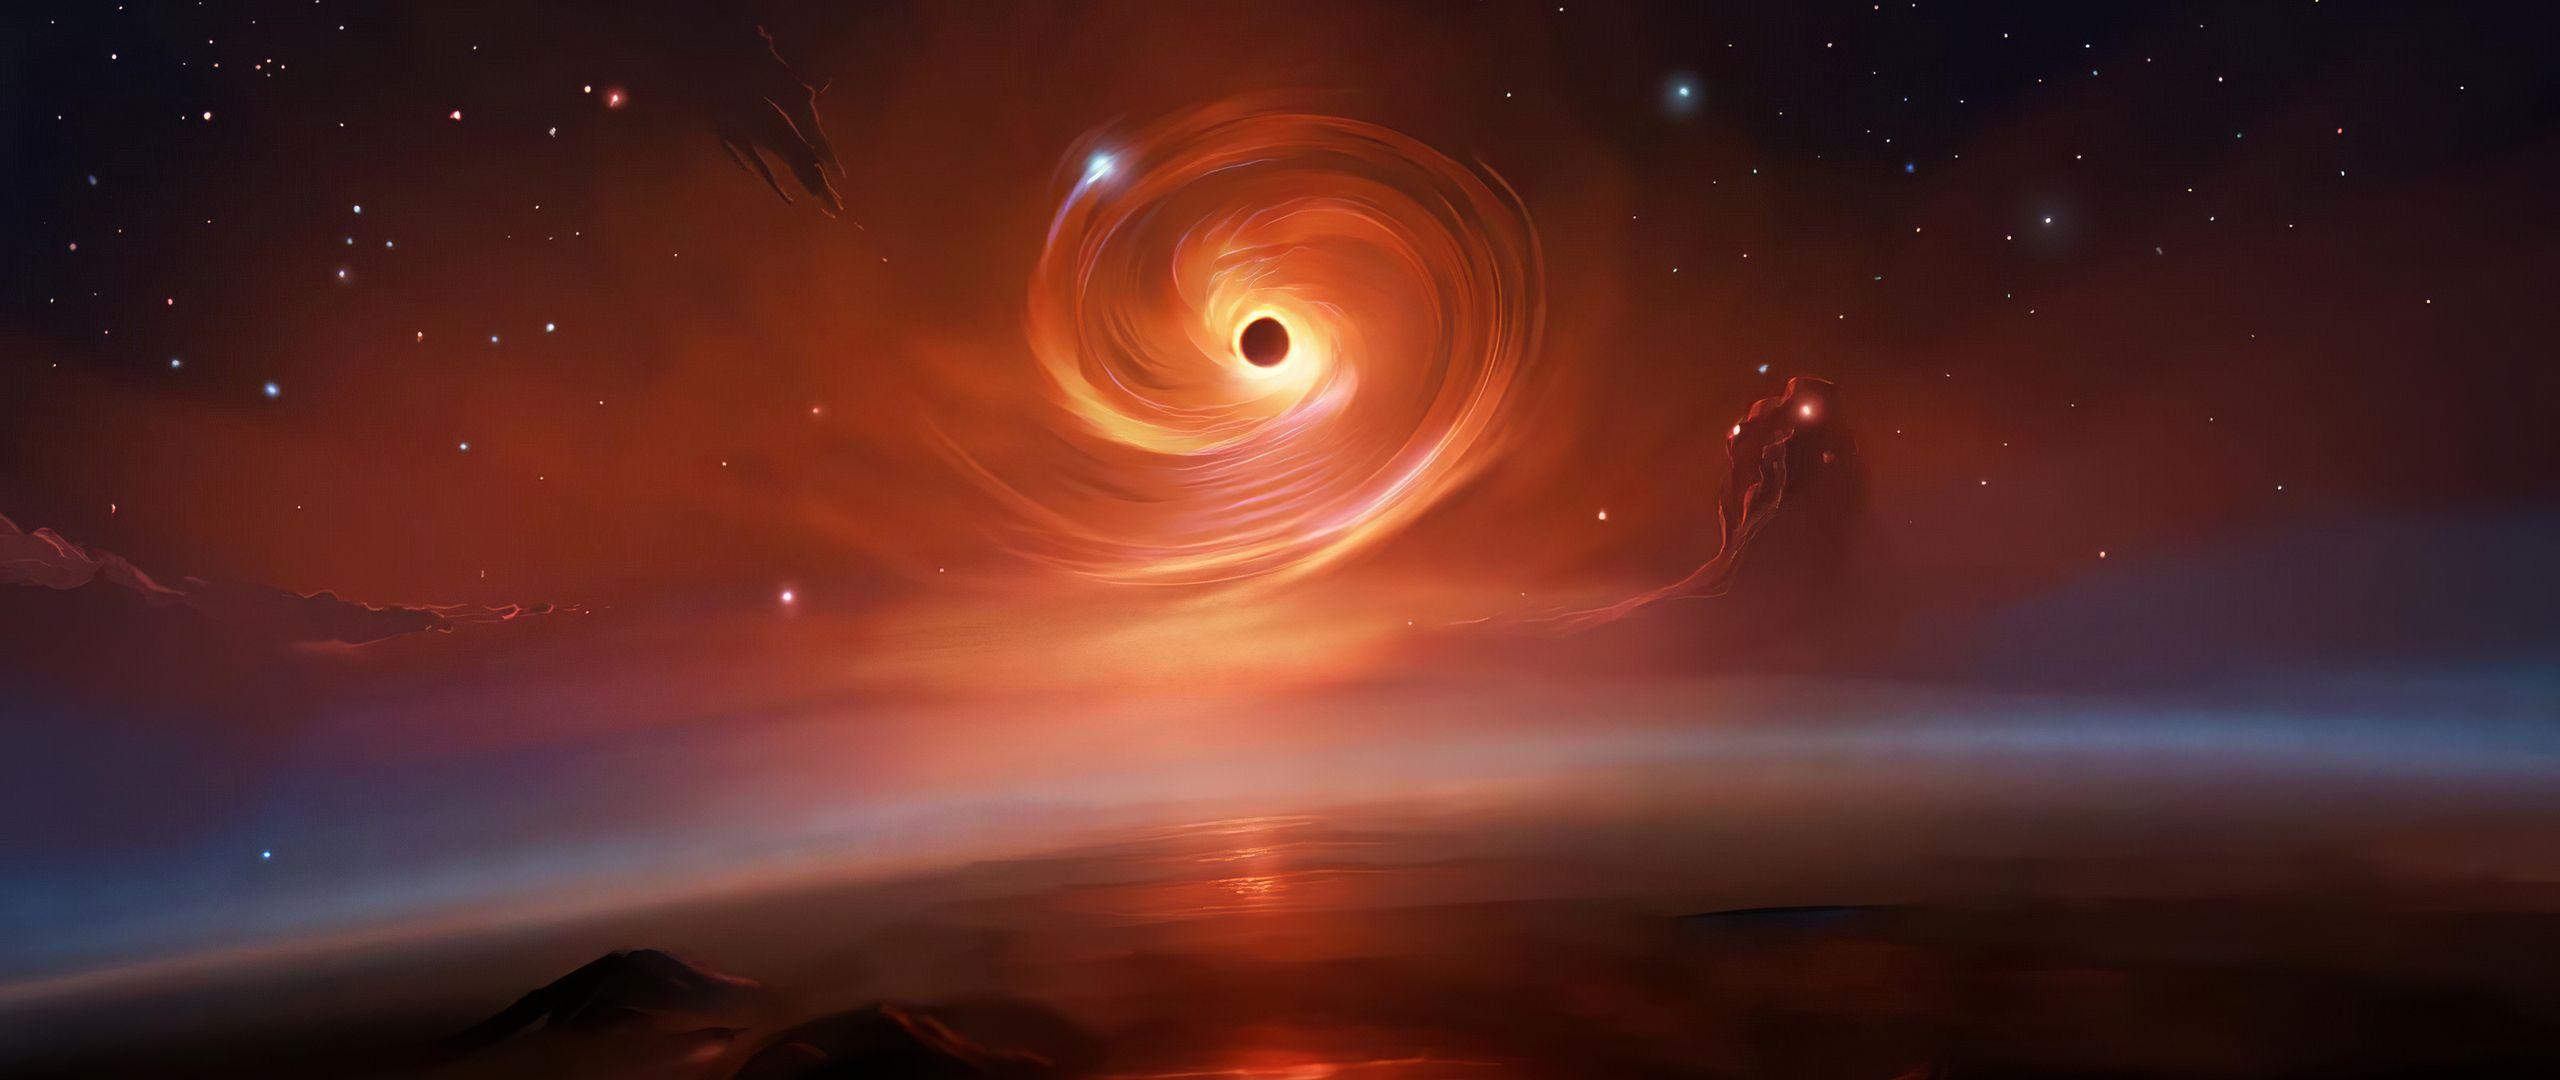 Black Hole HD Wallpapers - Top Free Black Hole HD Backgrounds